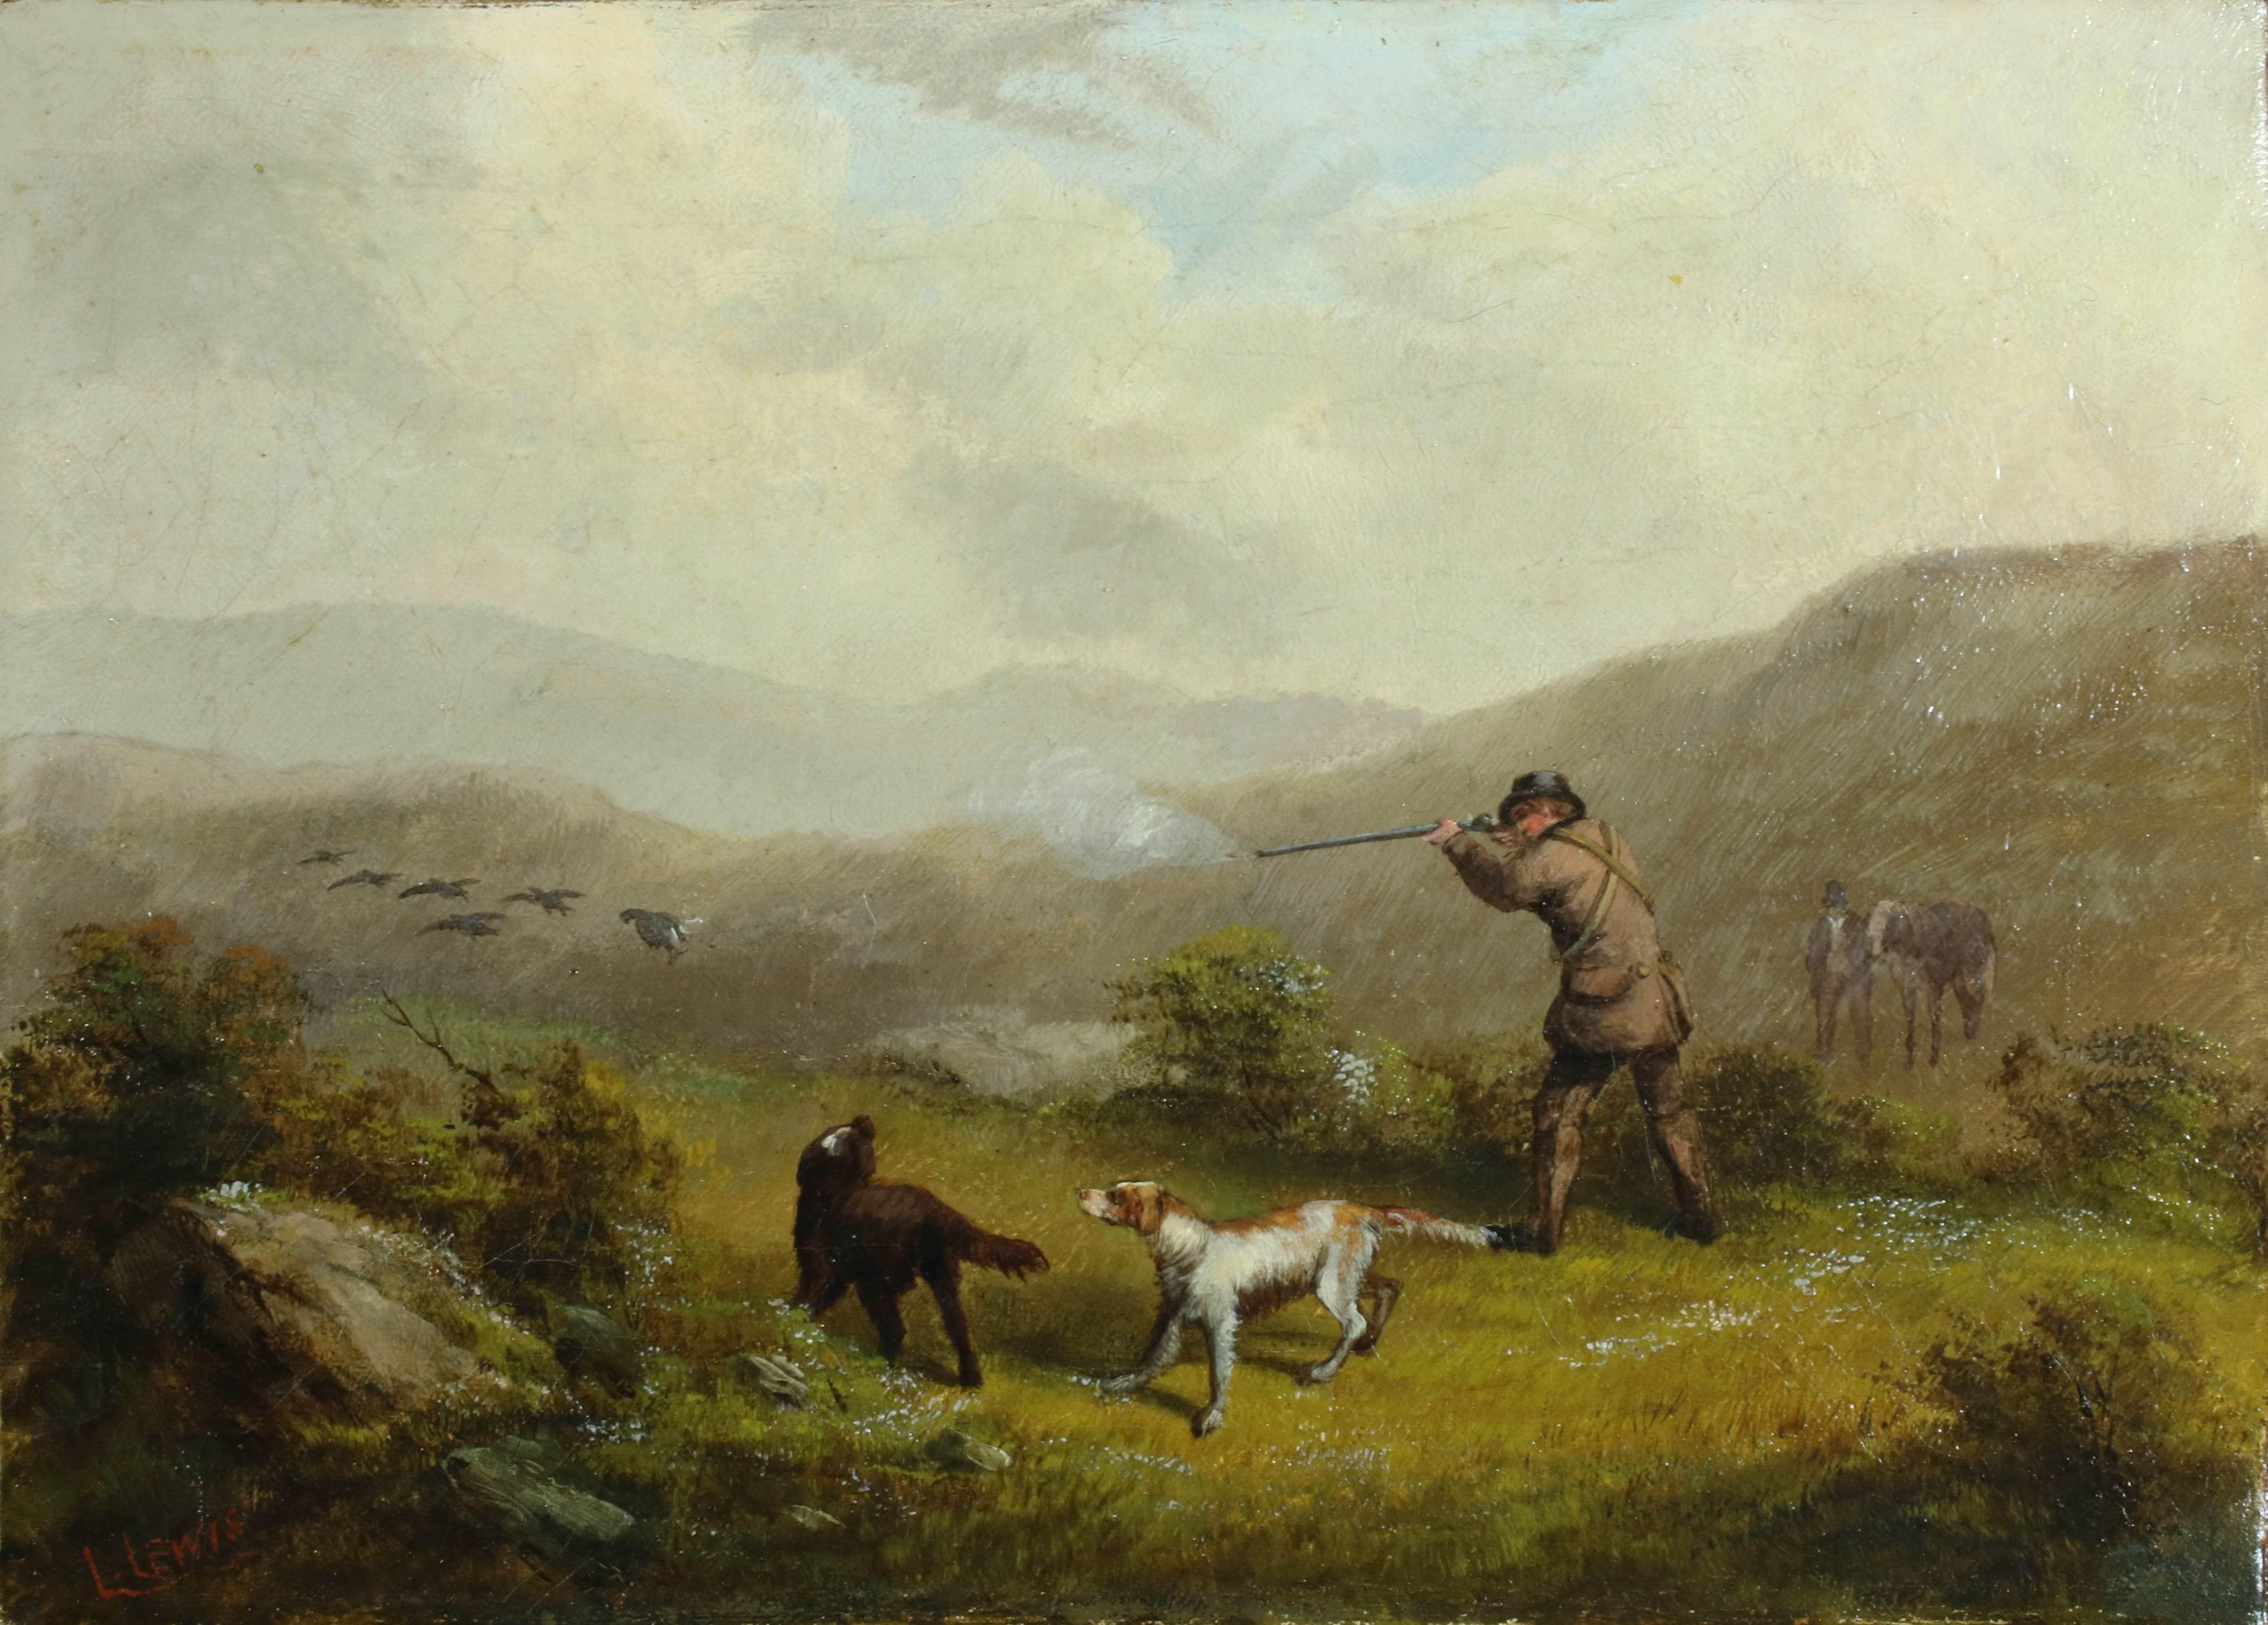 Lennard Lewis Animal Painting - The Grouse Shoot 19th Century Gun with Dogs and grouse in hilly landscape, Oil 